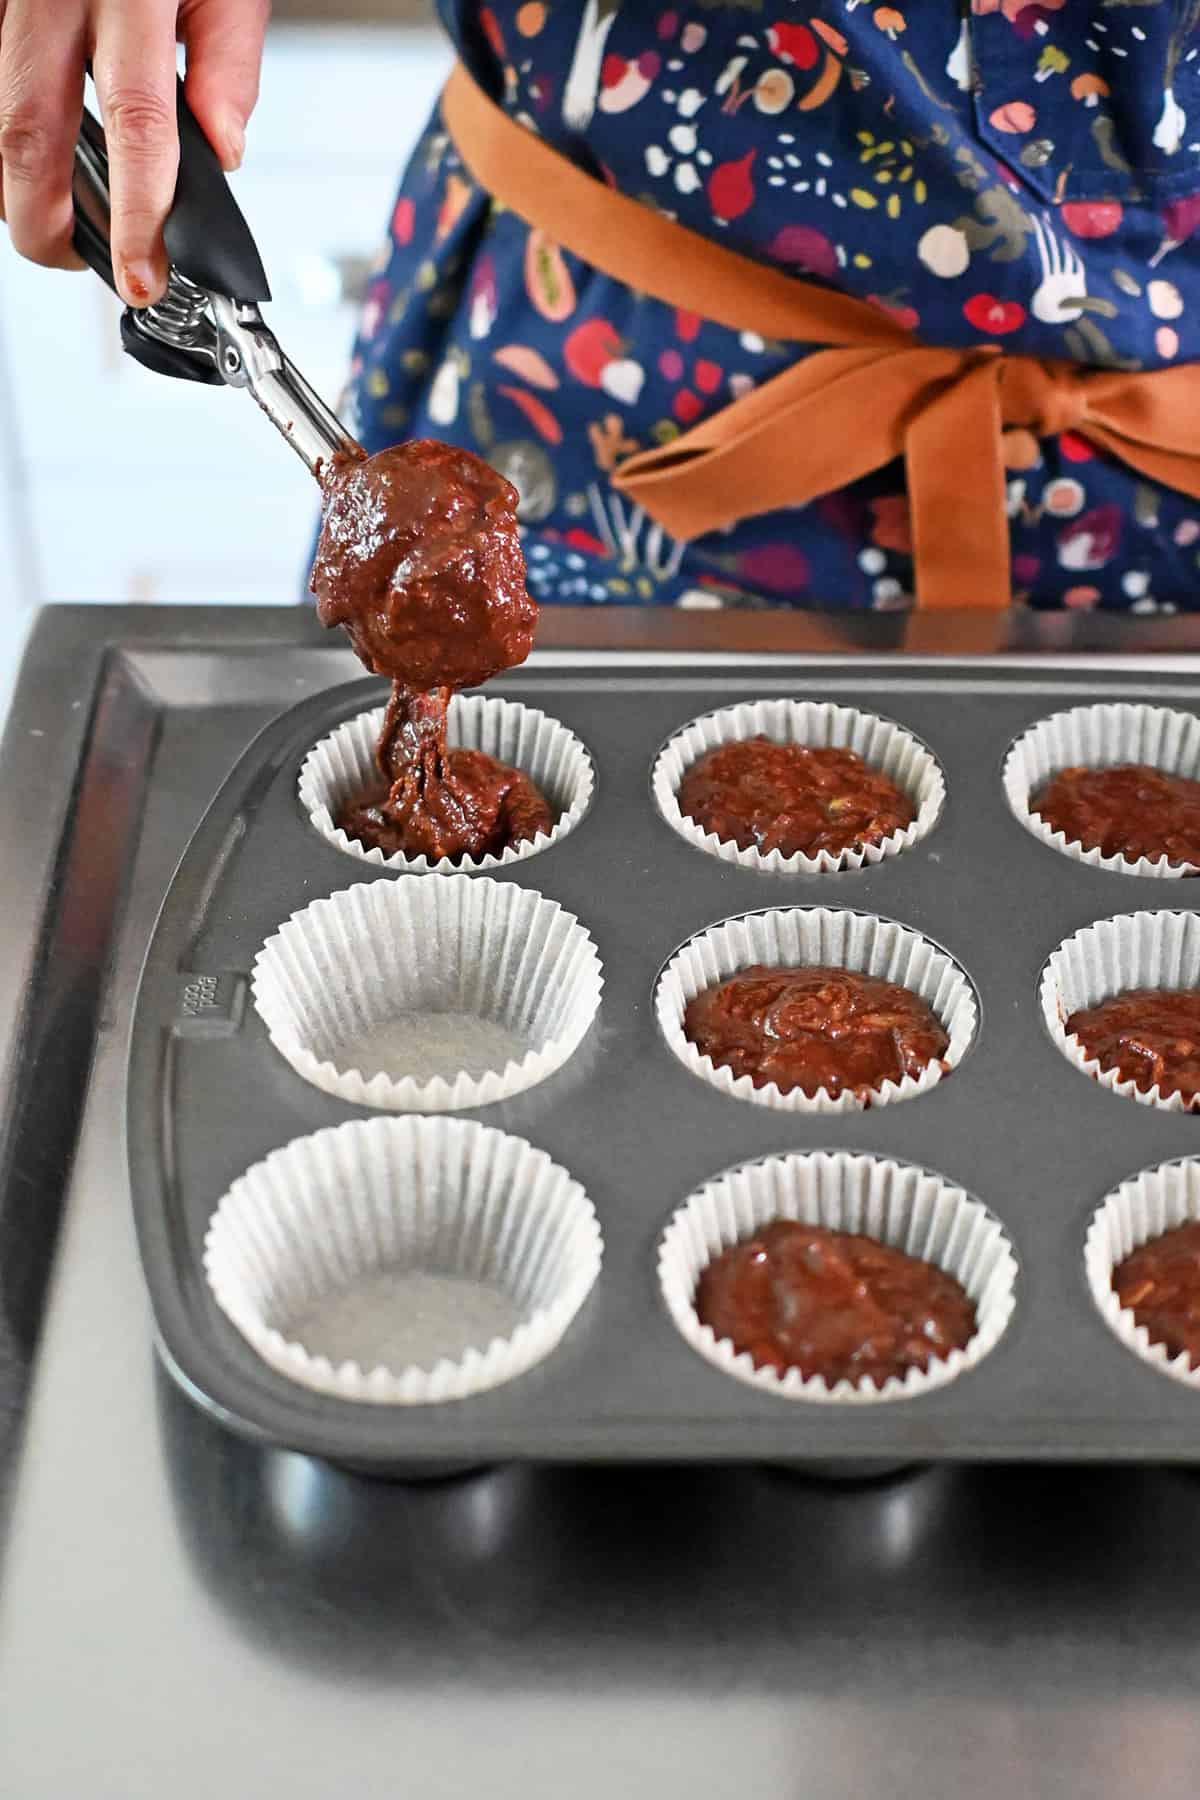 Using an ice cream scooper to transfer the chocolate zucchini muffin batter into a parchment paper lined muffin tin.